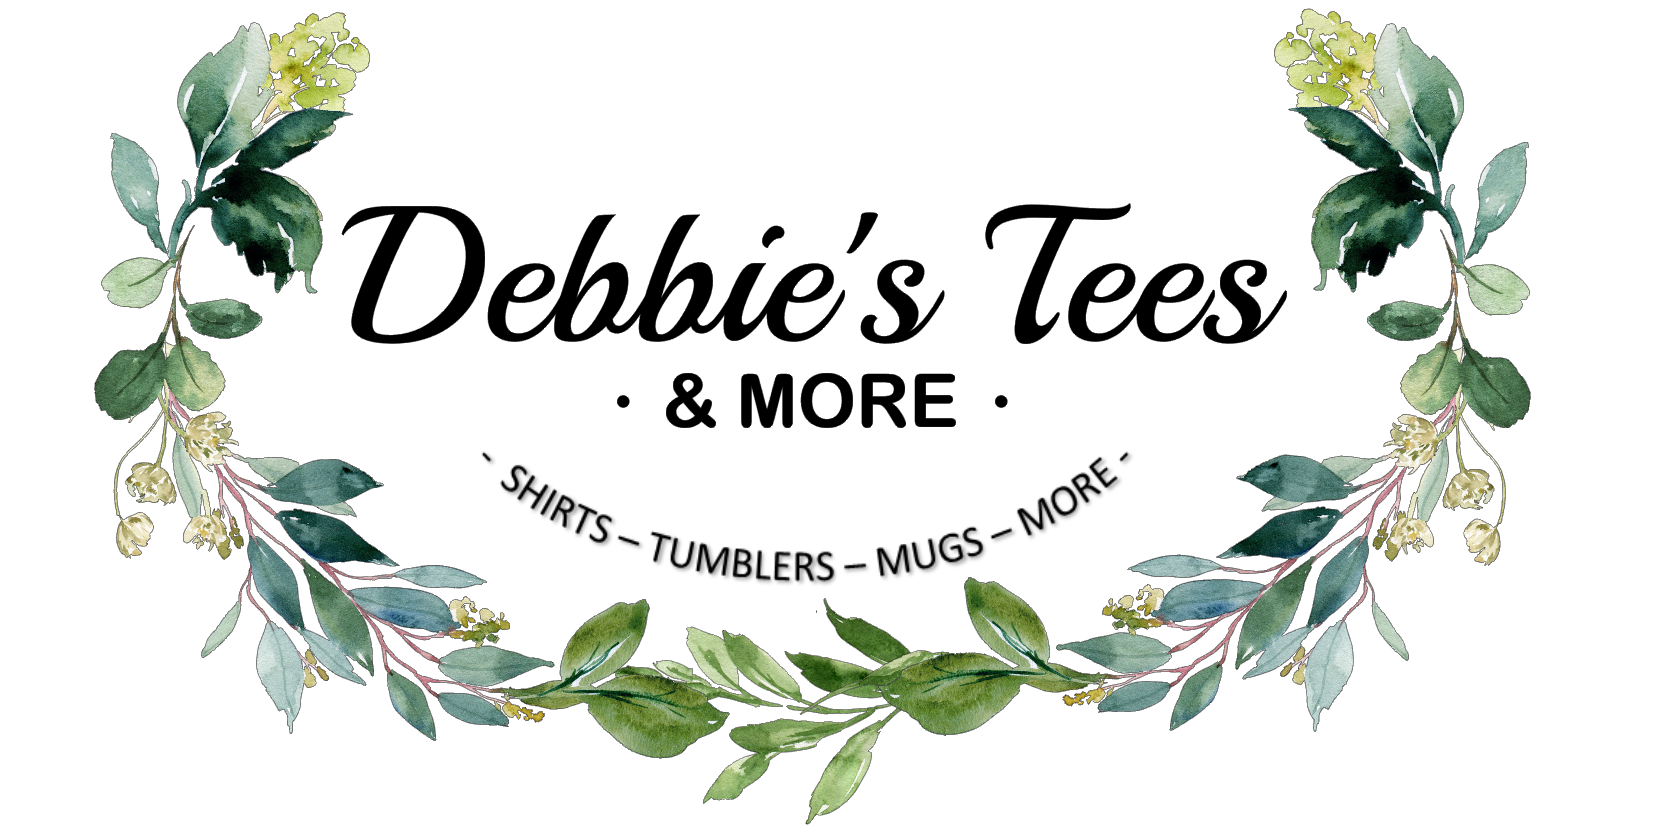 Debbie's Tee's and More!